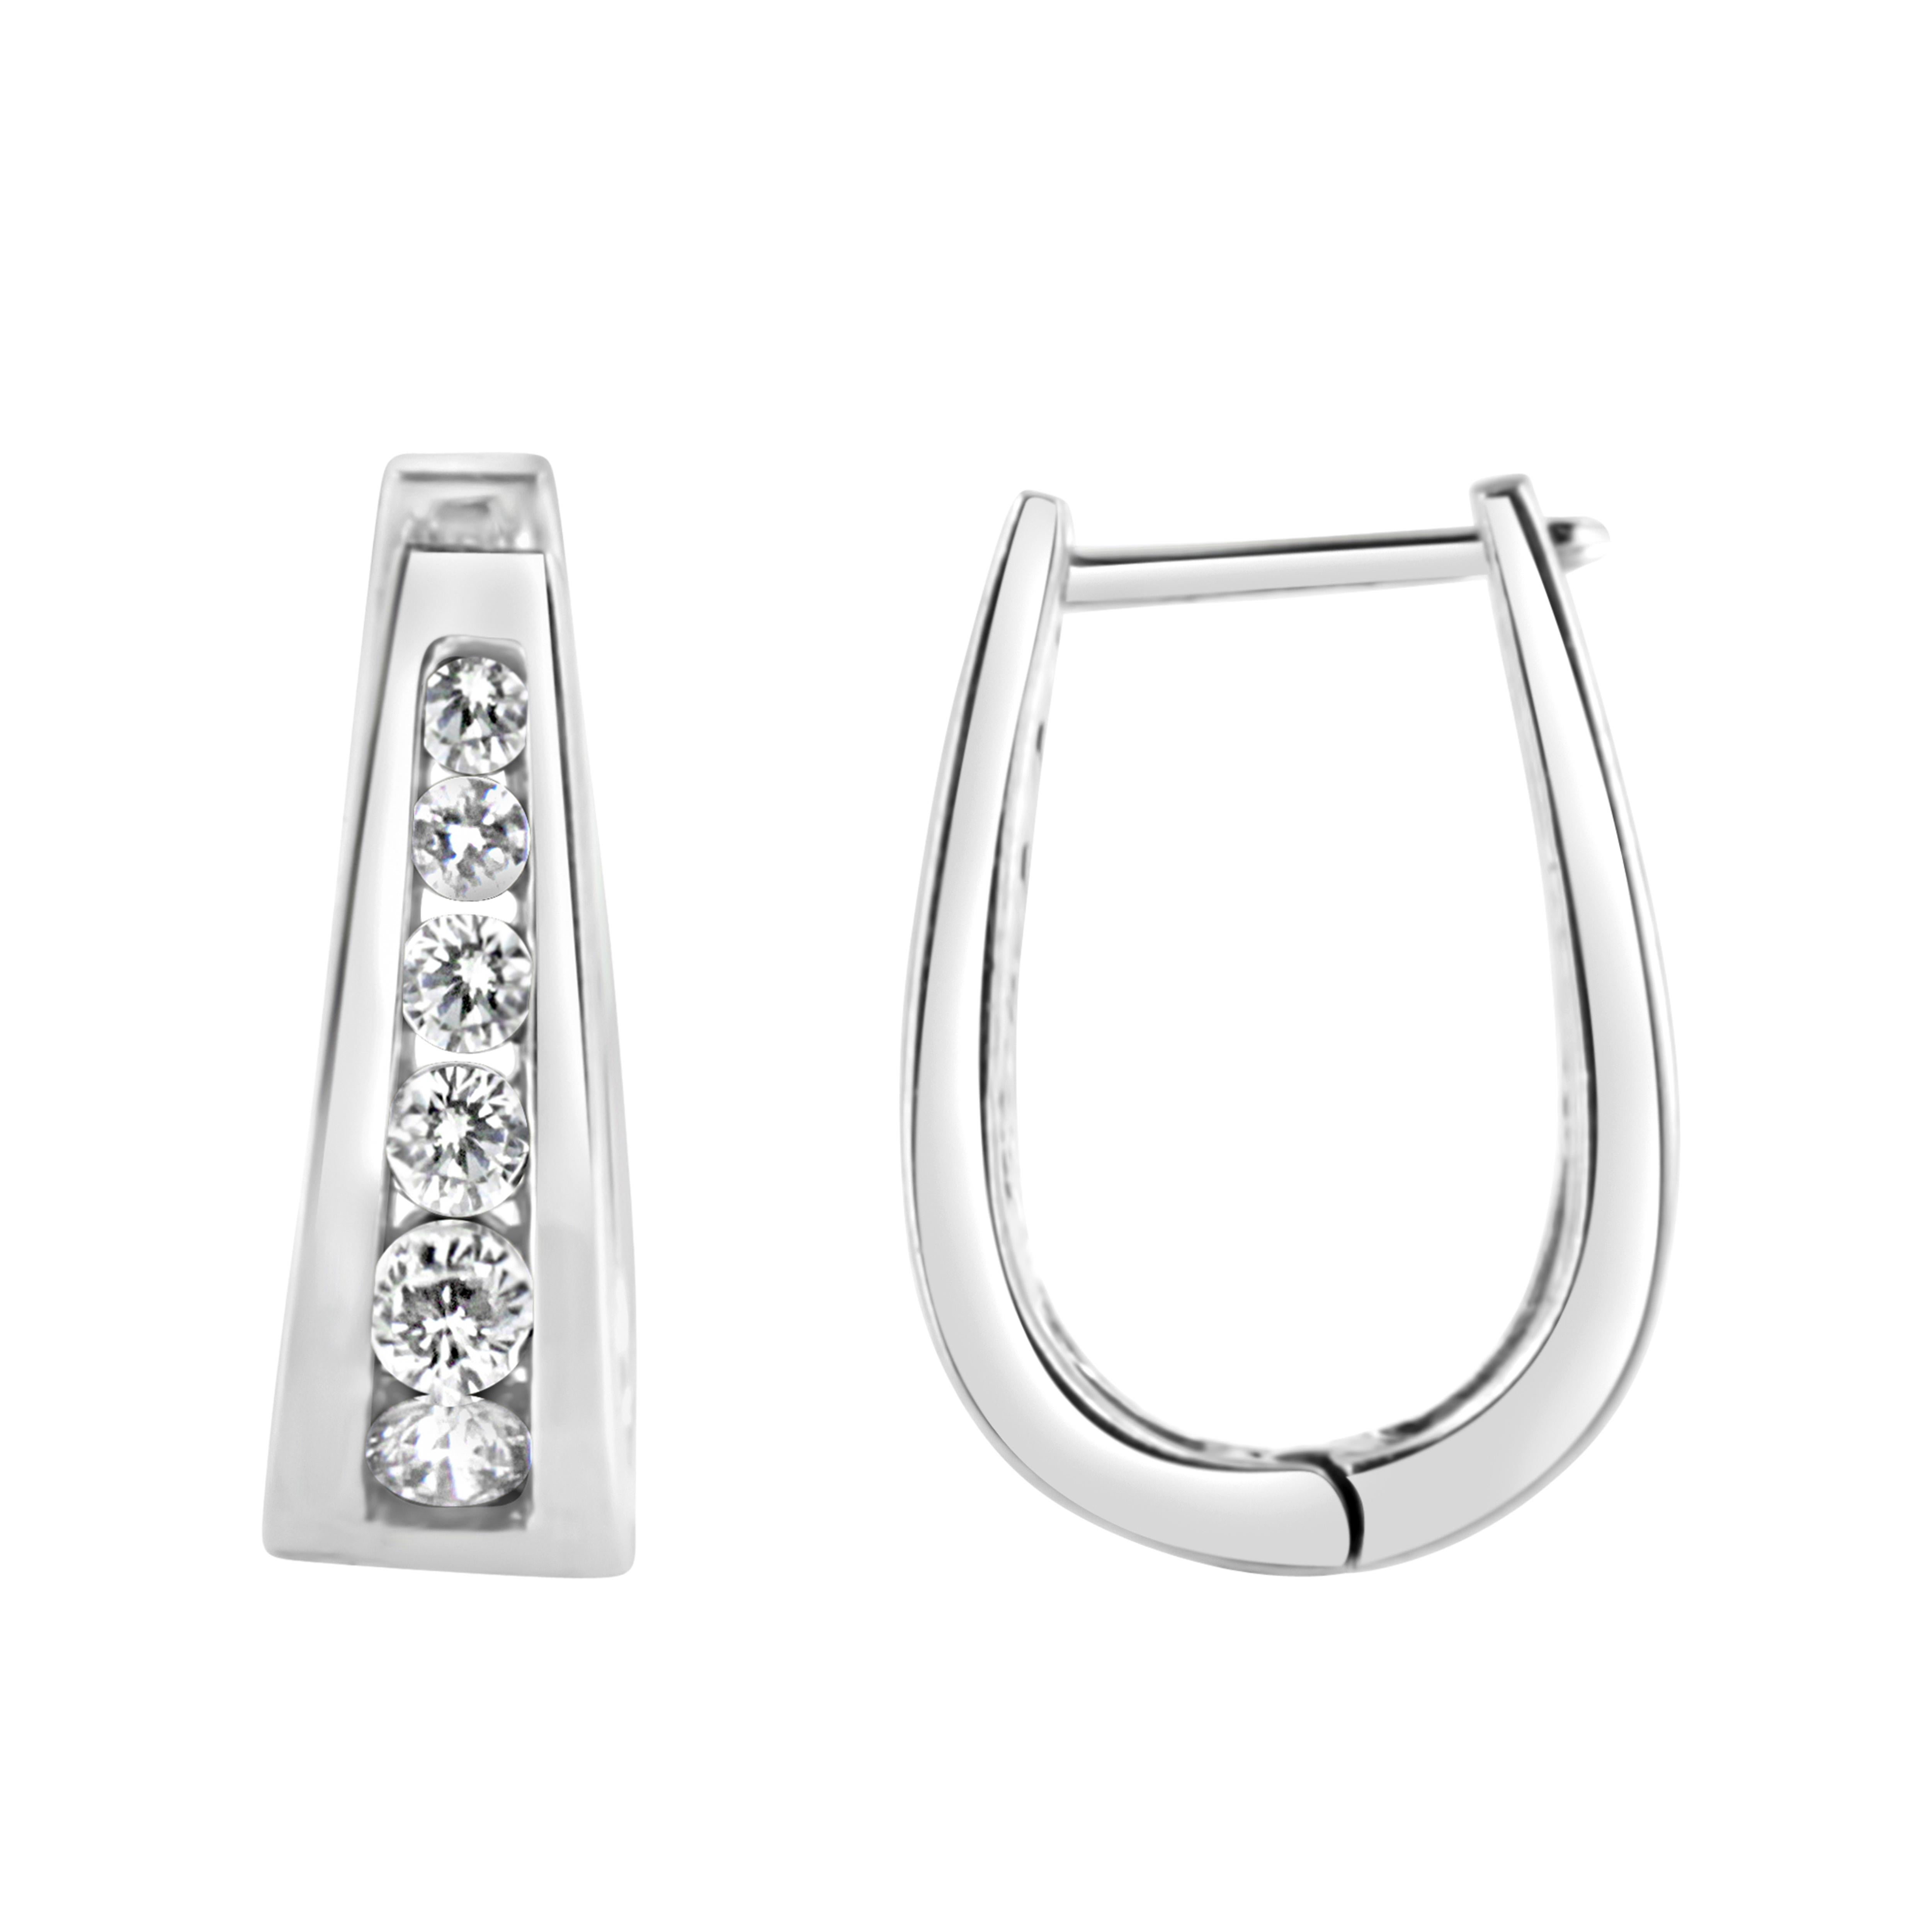 Add some sparkle to your every day with these 14k white gold hoop earrings that feature 1/2ct TDW of glistening diamonds. Each earring features a row of channel set round cut diamonds that inlays the front of the hoop. A clip on mechanism keeps the